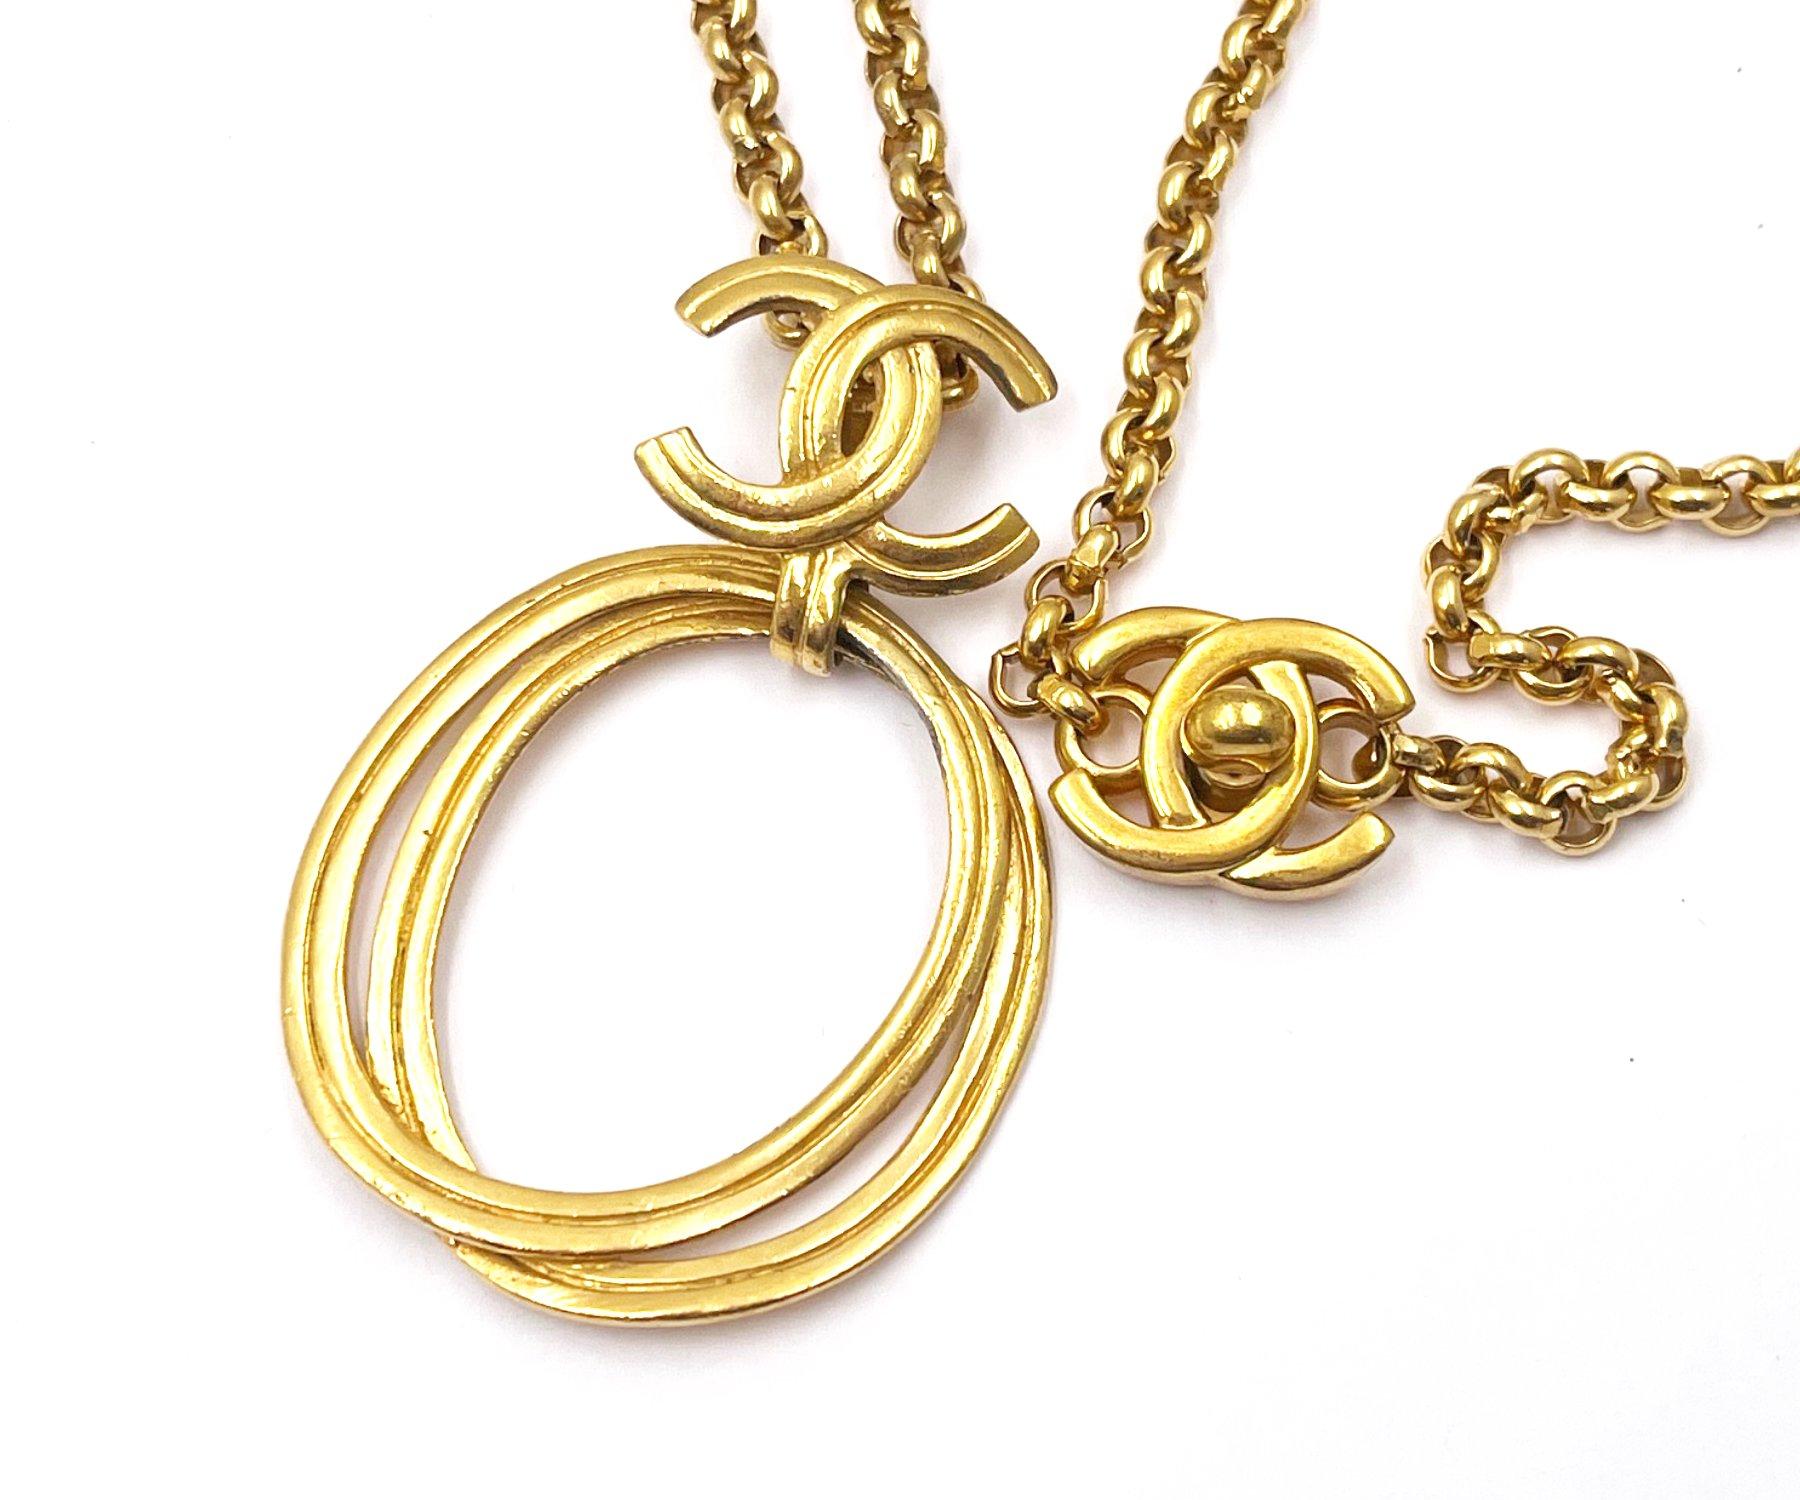 Chanel Vintage Rare Gold Plated CC Ring Turnlock Necklace In Good Condition For Sale In Pasadena, CA